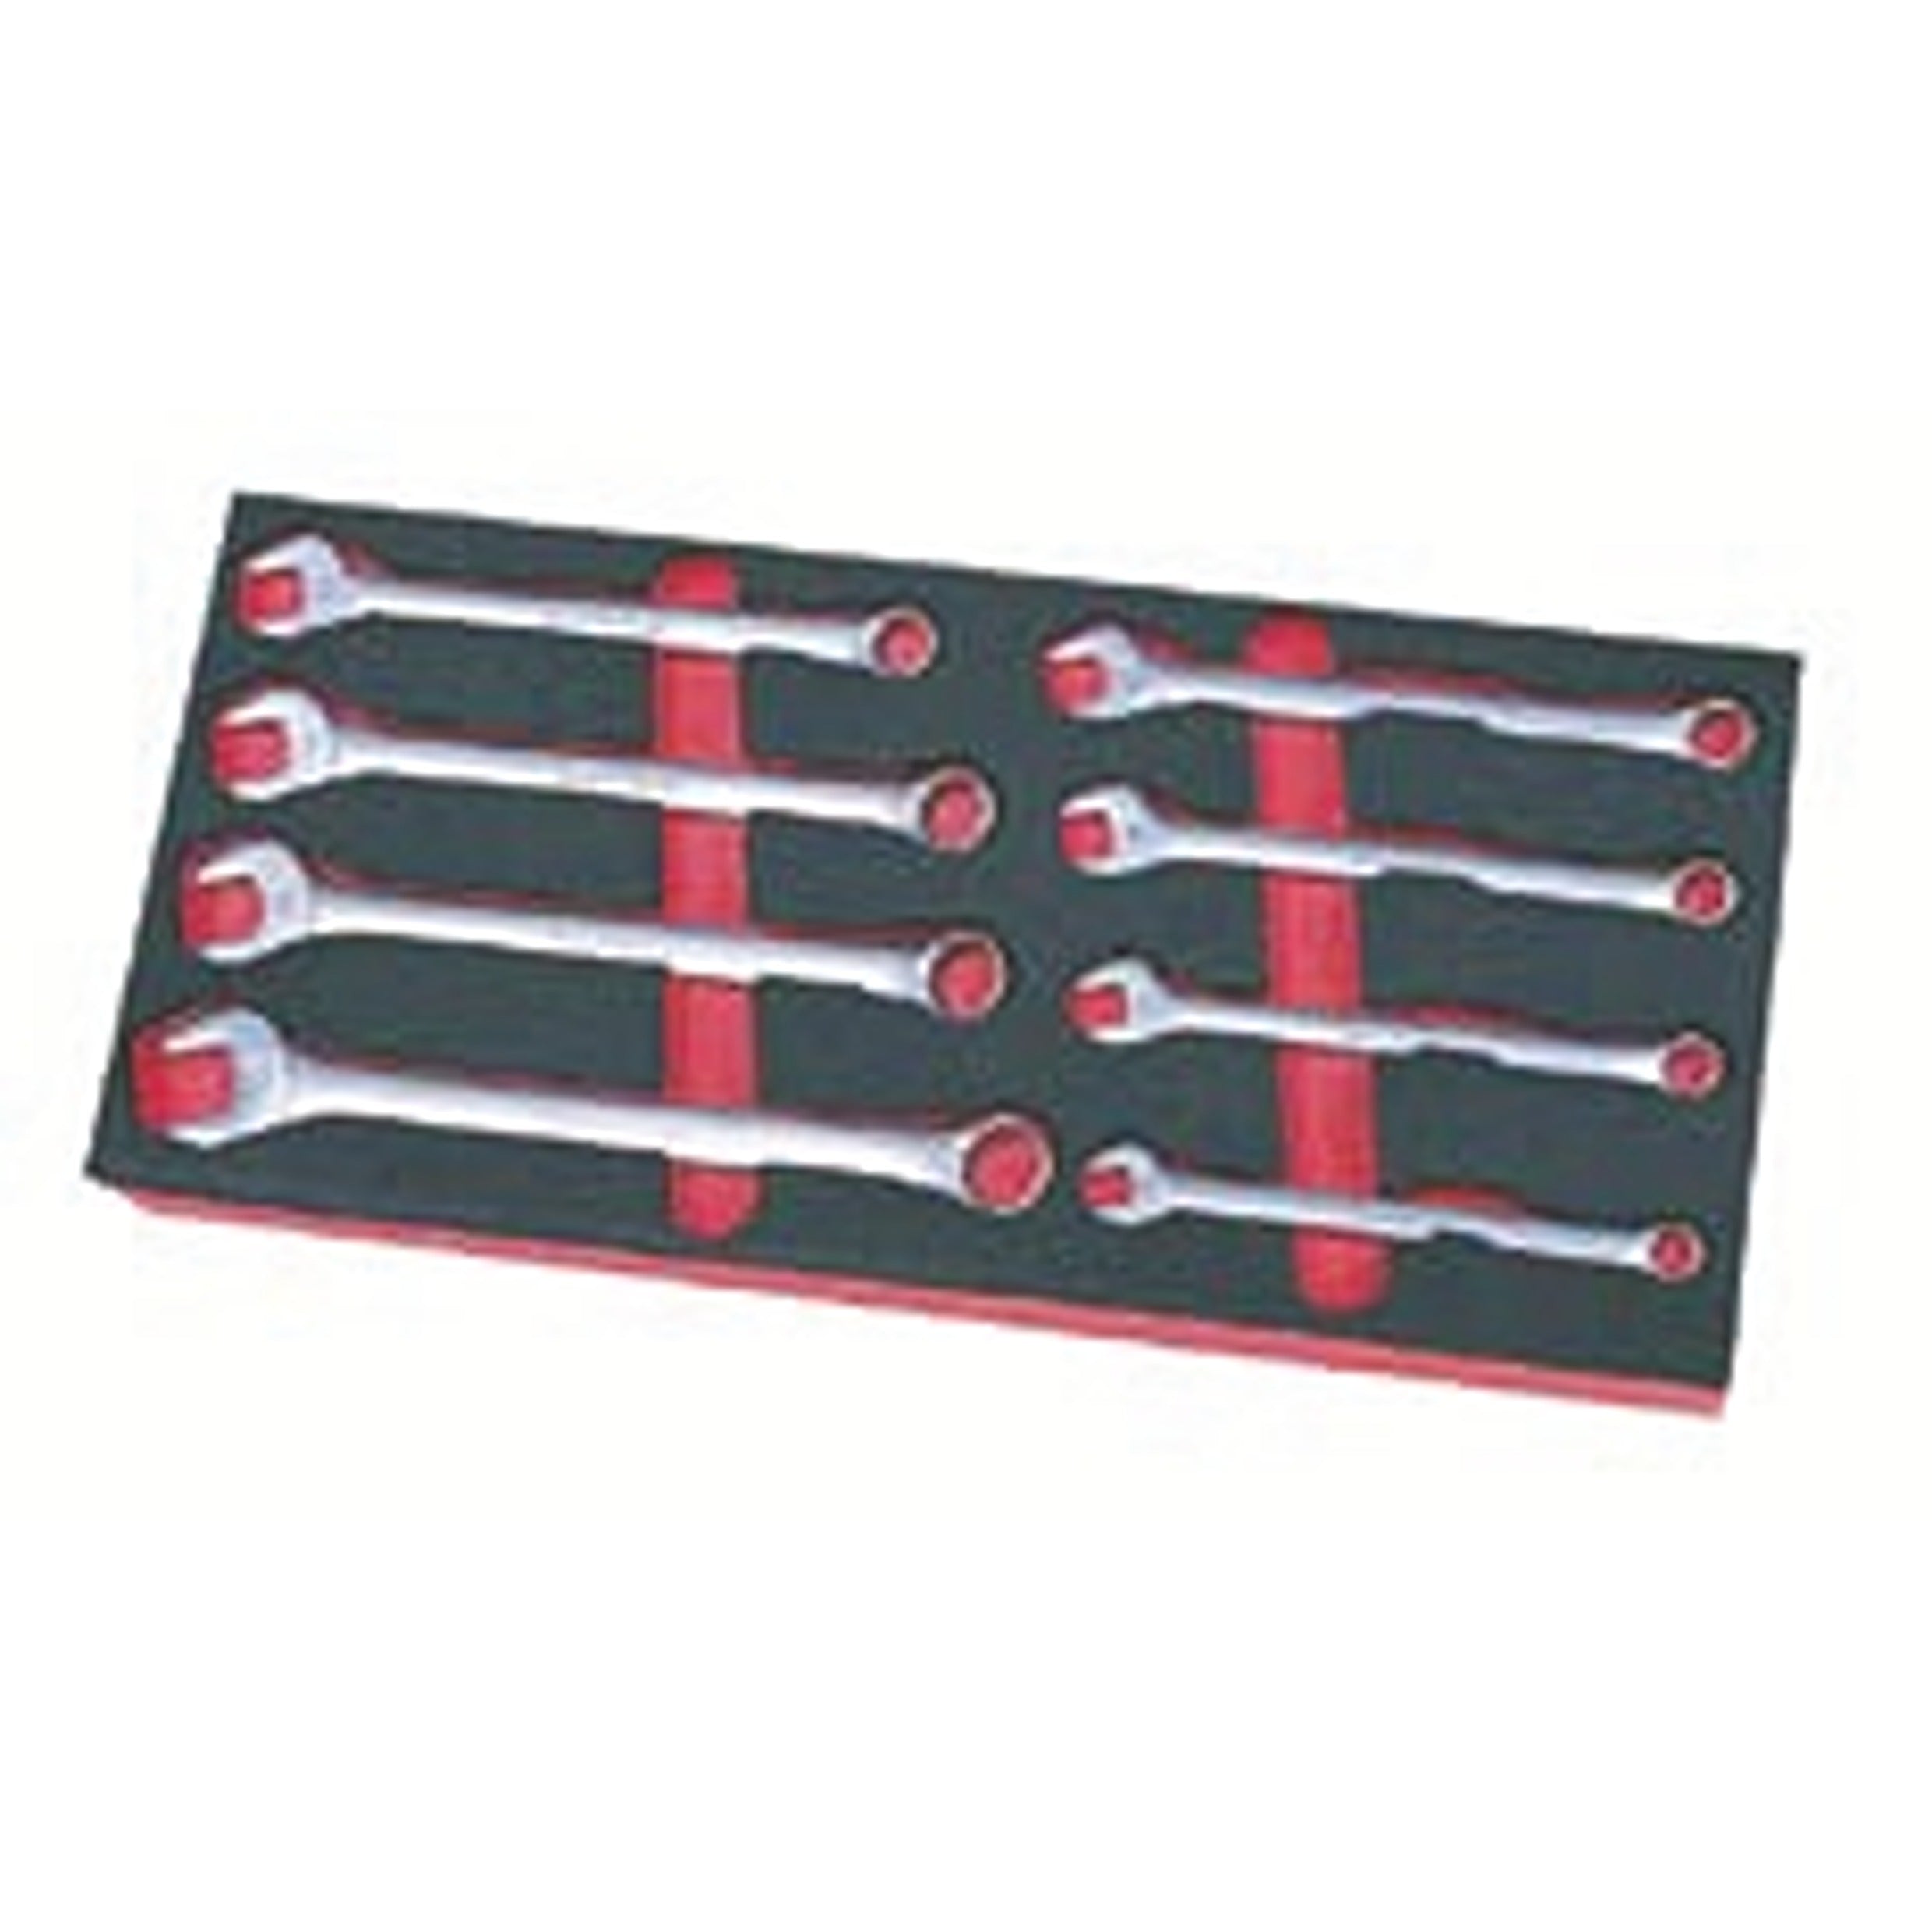 BRITOOL RJM10/STC 8 Piece Metric Combination Wrench Set - Premium Combination Wrench Set from BRITOOL - Shop now at Yew Aik.